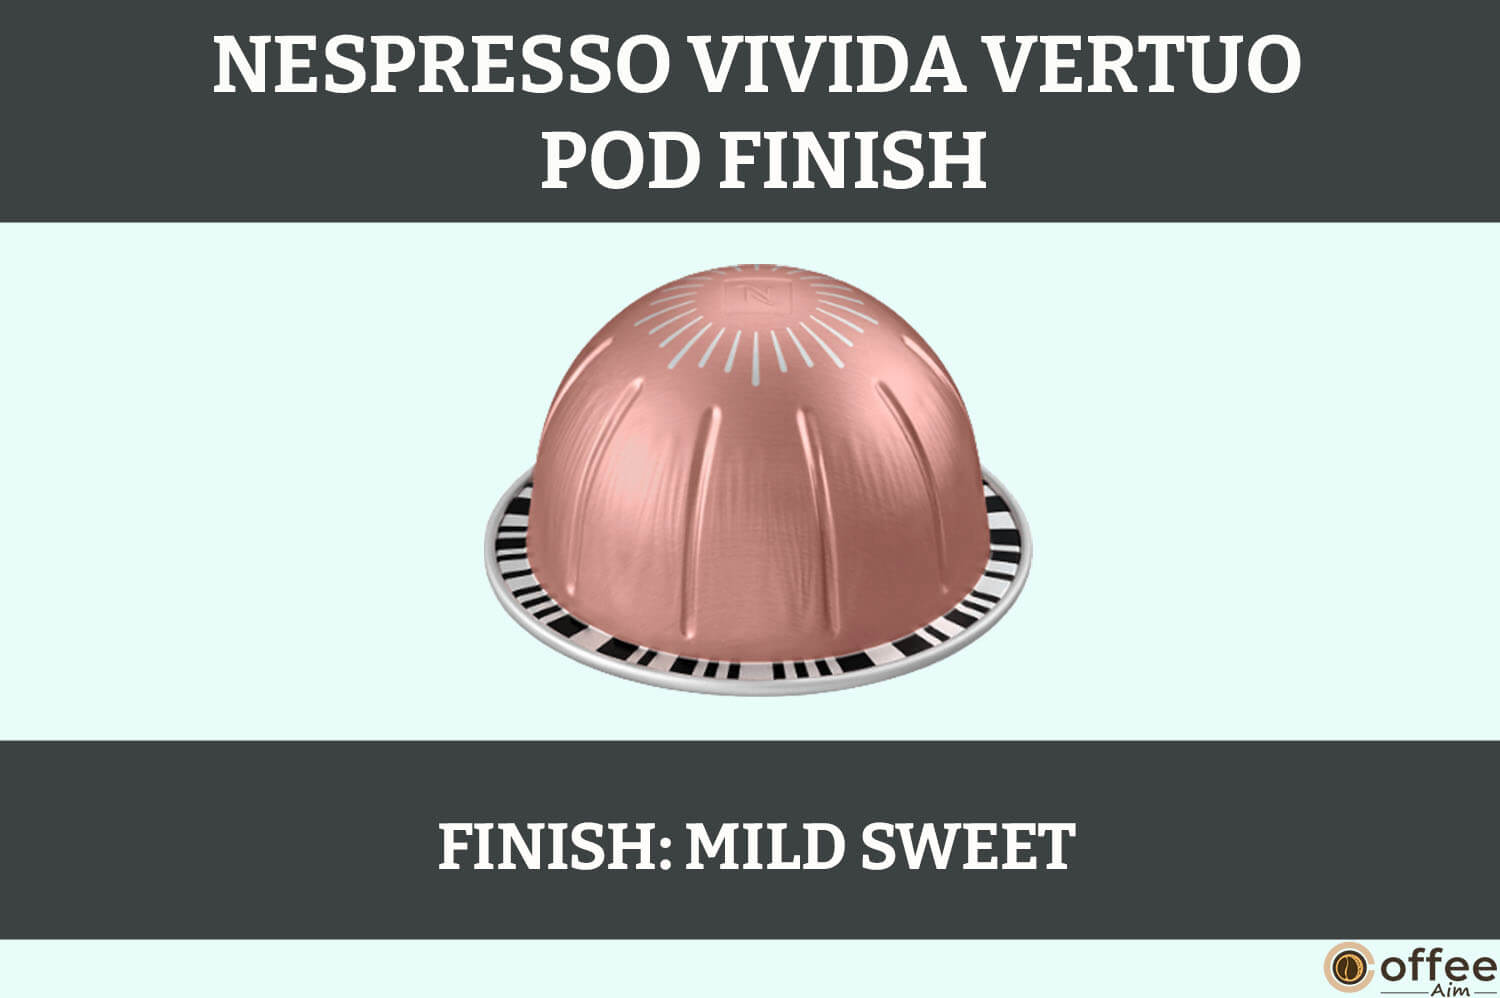 This image depicts the Nespresso Vivida Vertuo pod, signaling the conclusion of the review on the 'Nespresso Vivida Vertuo Pod'